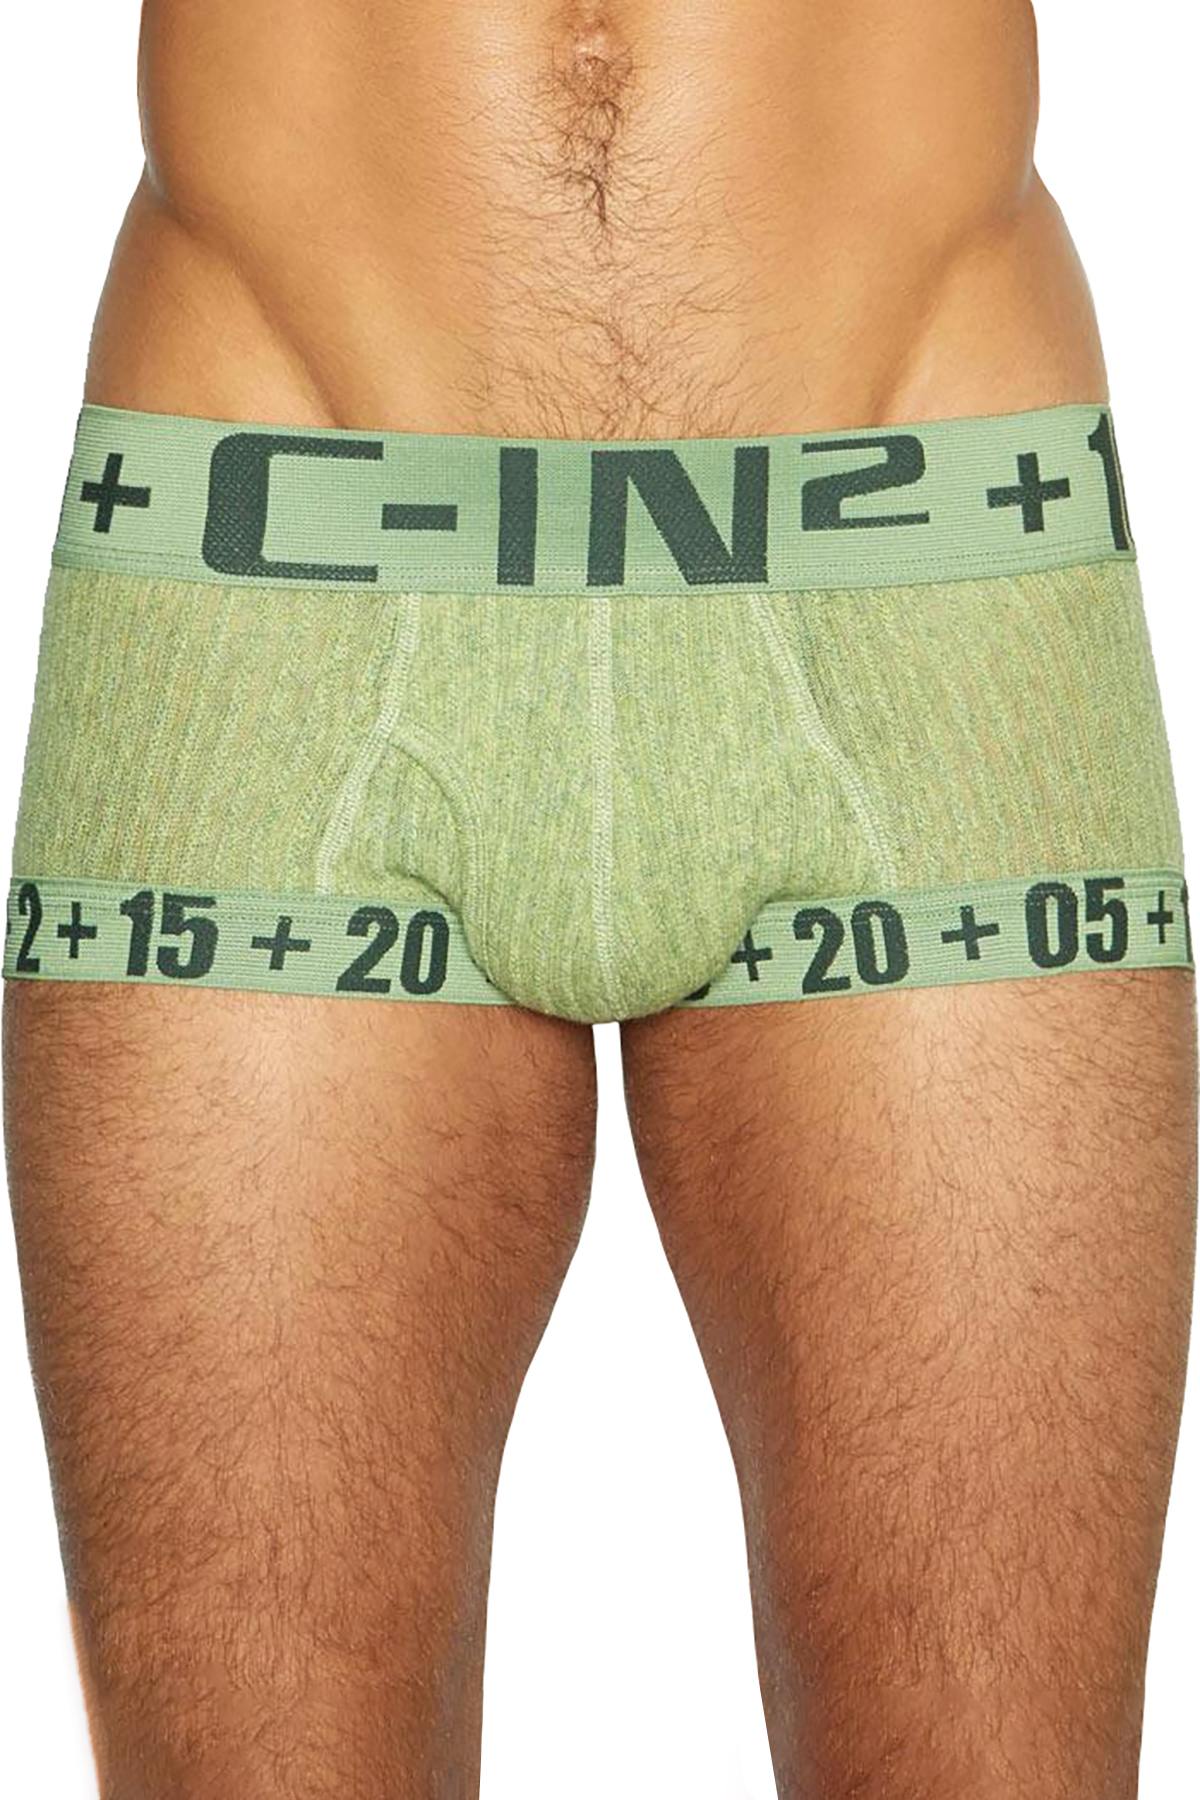 C-IN2 Ticonderoga H+A+R+D Fly Front Trunk – CheapUndies